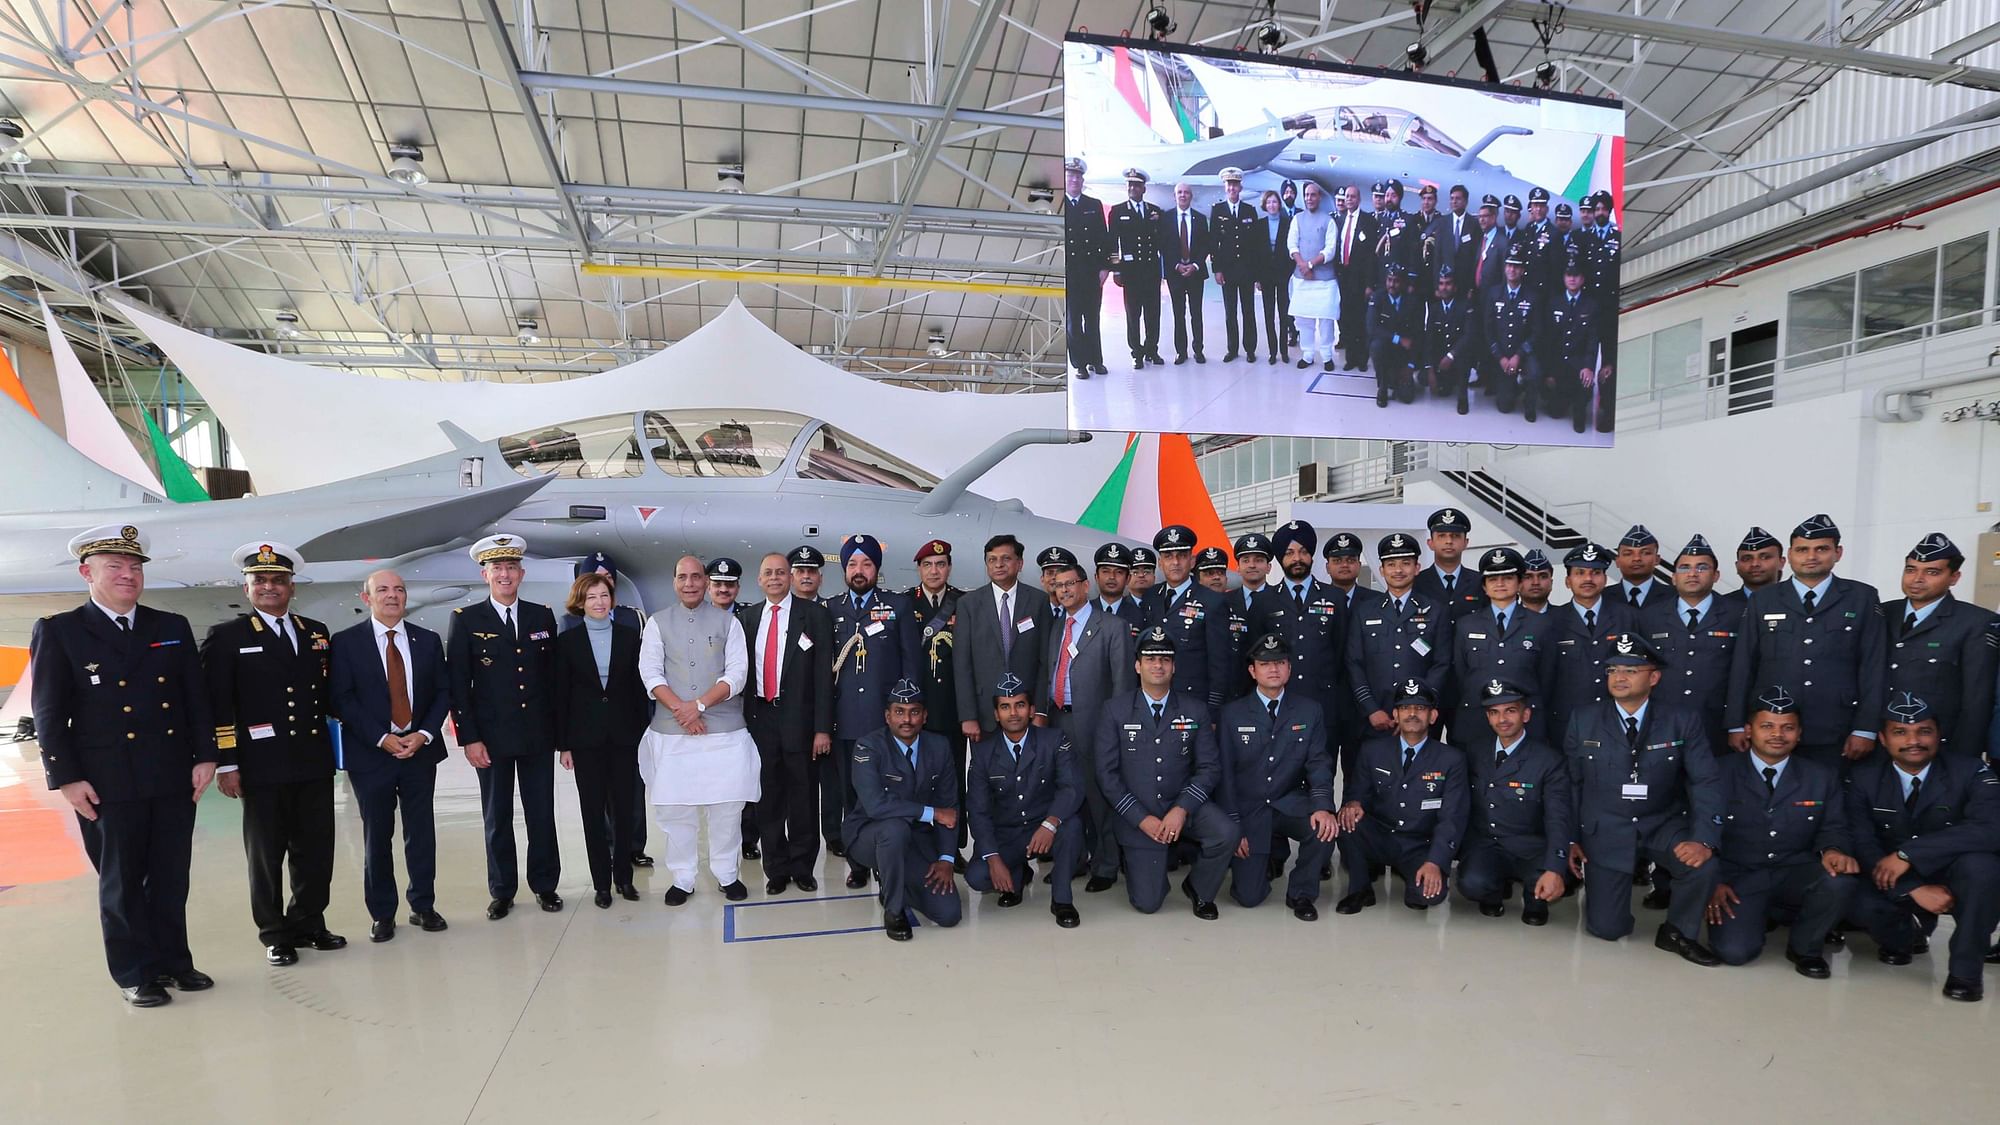 Defense Minster Rajnath Singh poses with Indian and French military officials at the Dassault Aviation plant in Merignac, near Bordeaux, southwestern France.